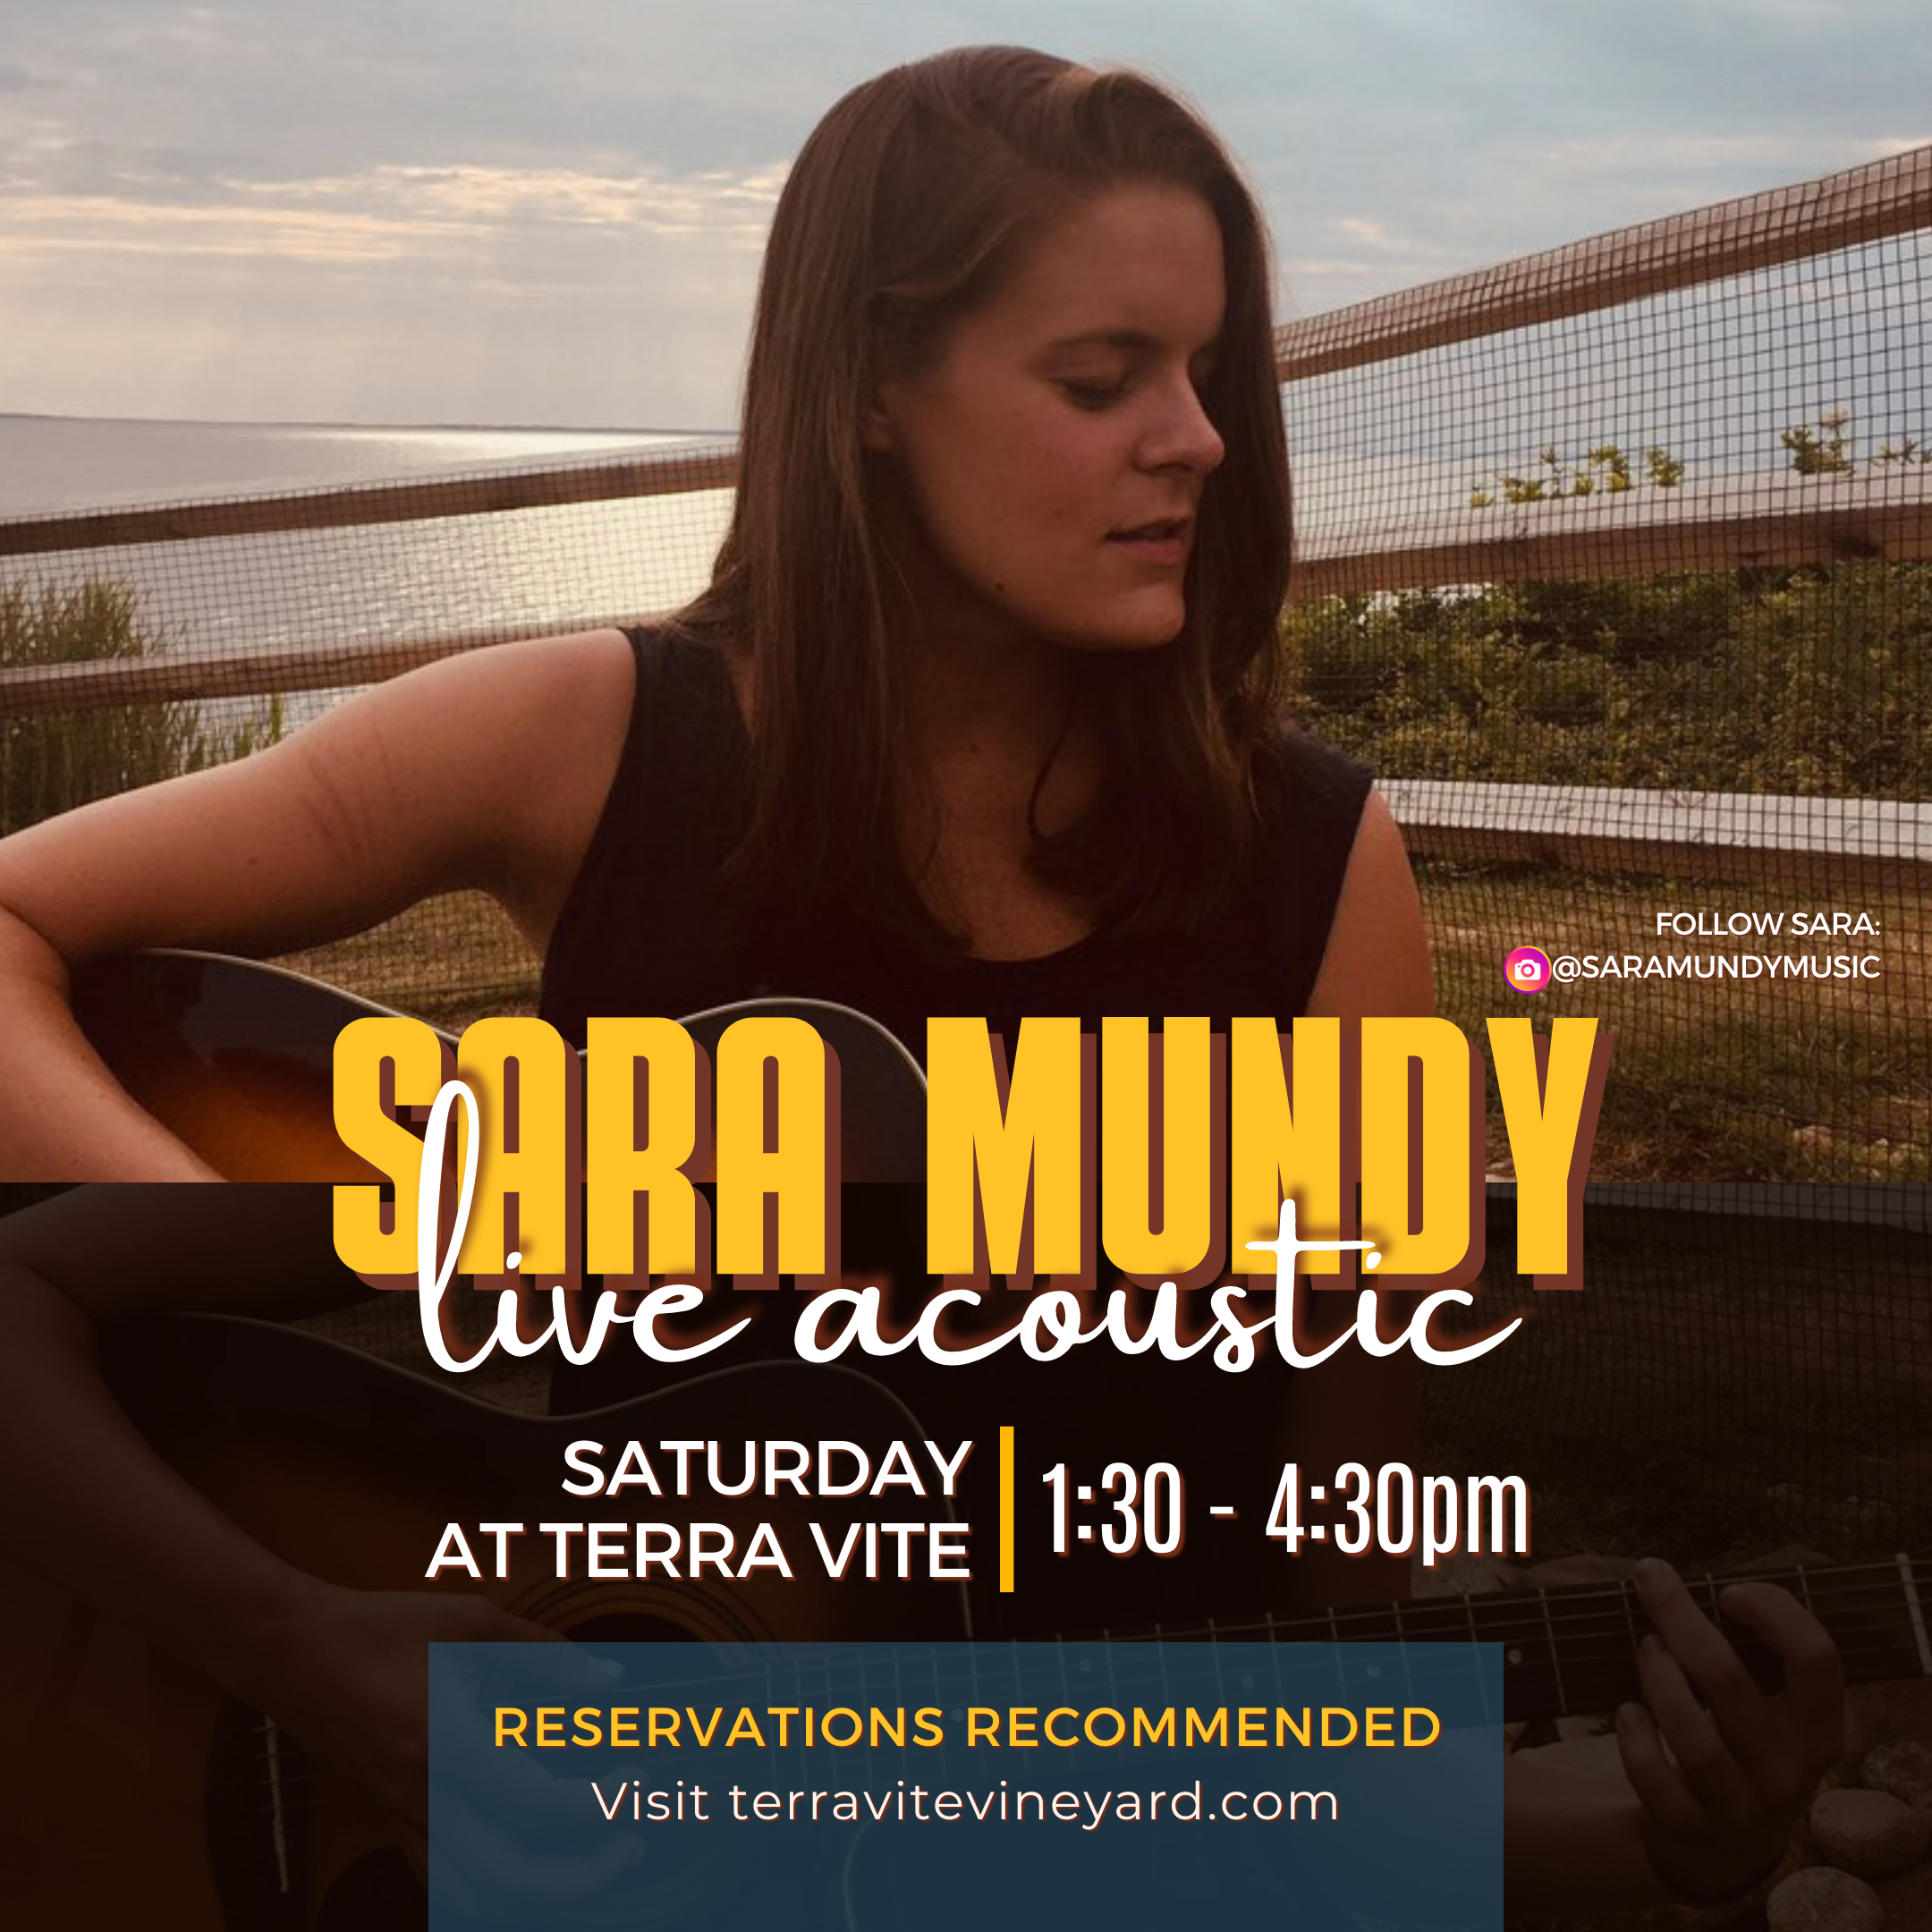 Live Music with Sara Mundy this Saturday afternoon from 1:30 - 4:30pm (reservations recommended)